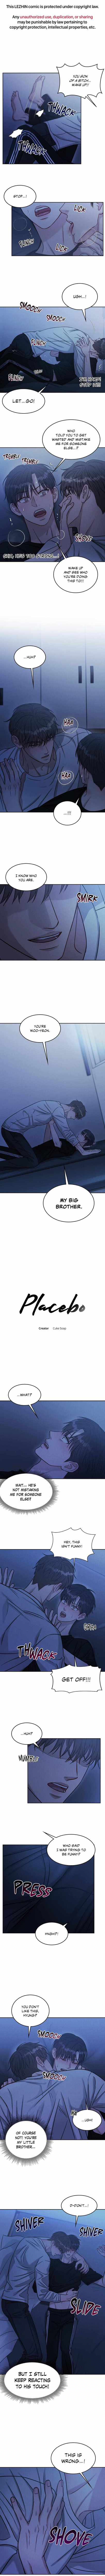 Placebo - Page 1